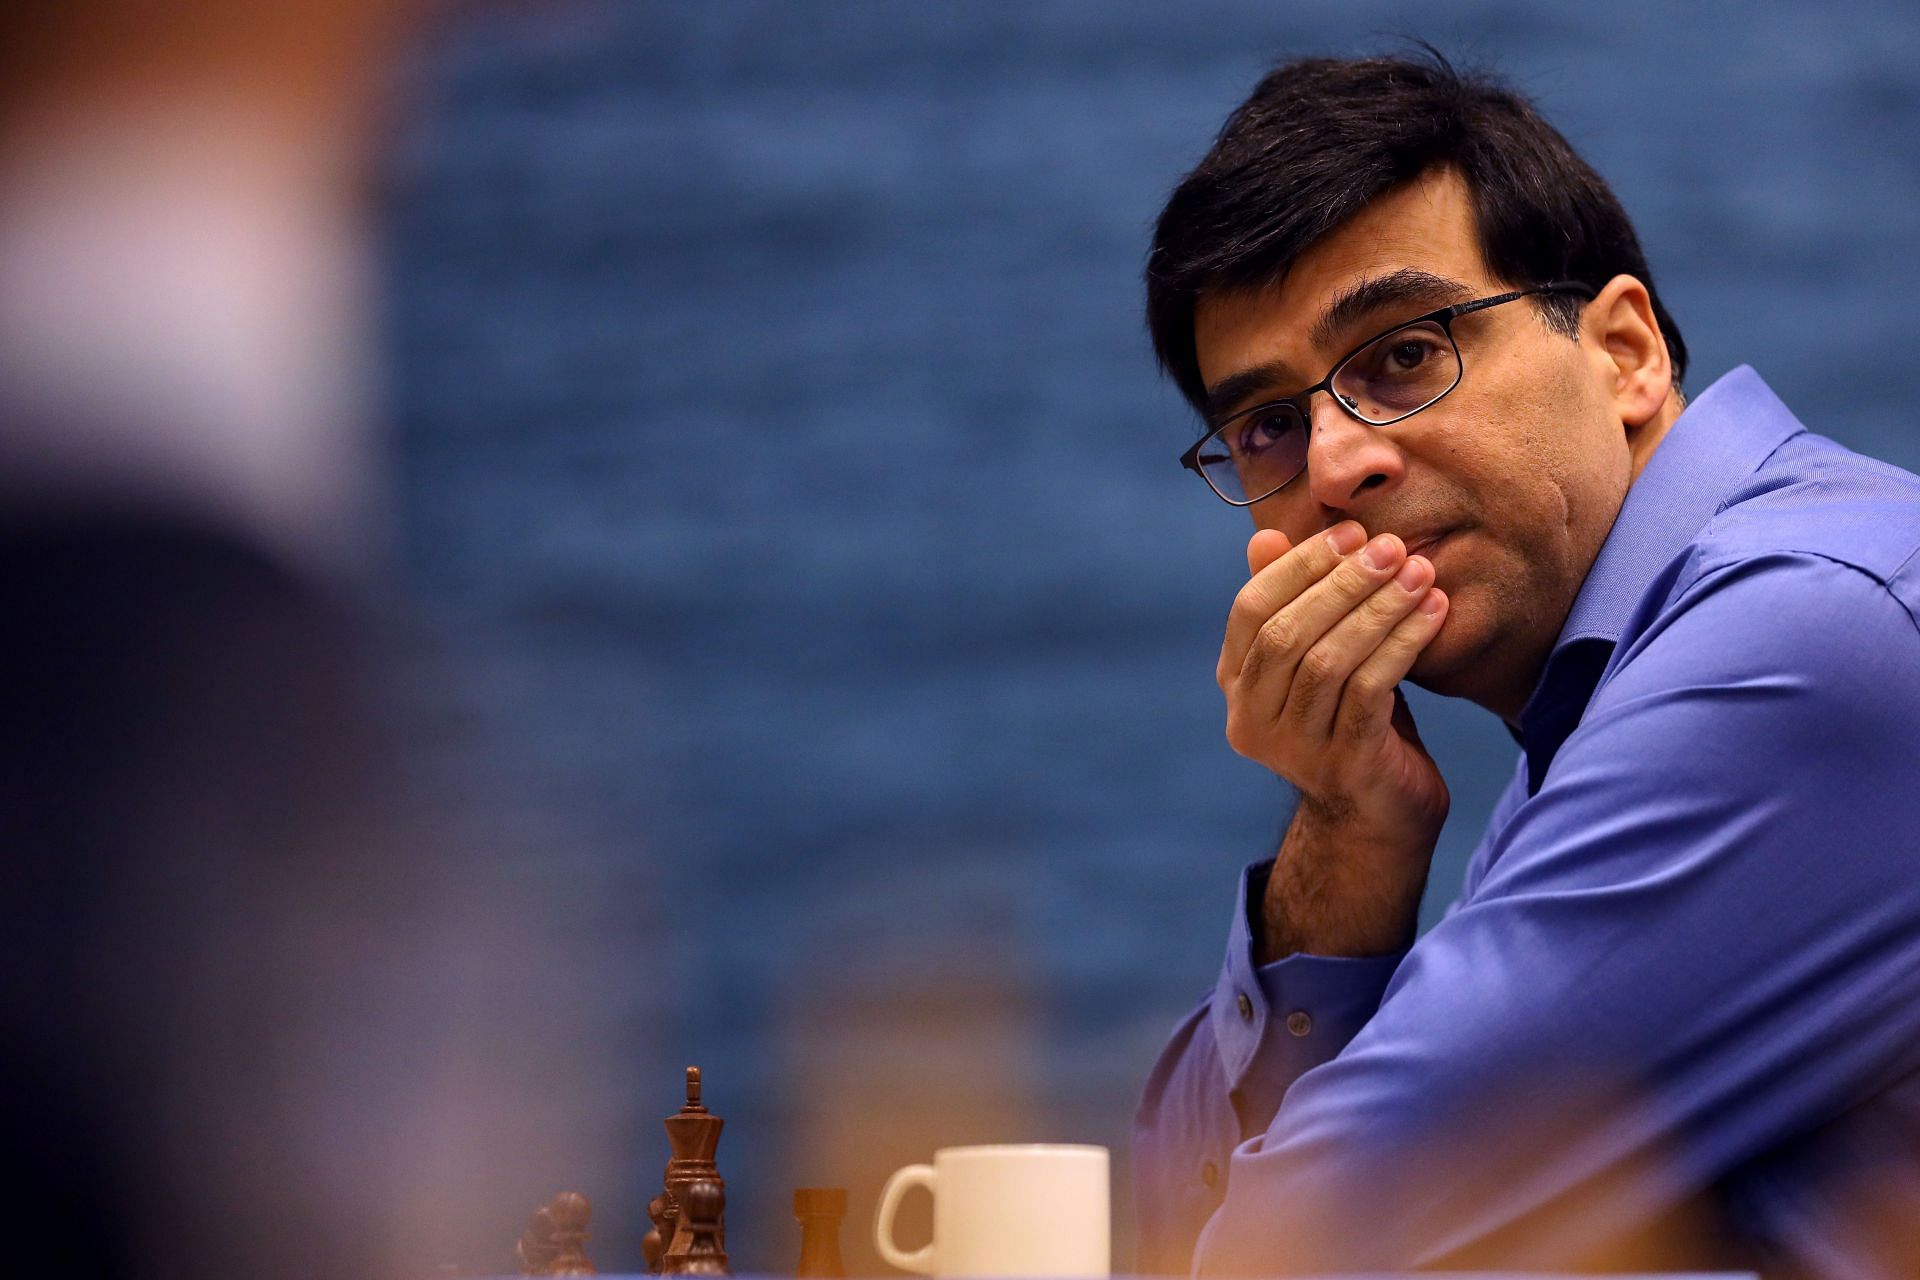 D Gukesh Replaces Viswanathan Anand as India's Top Chess Player